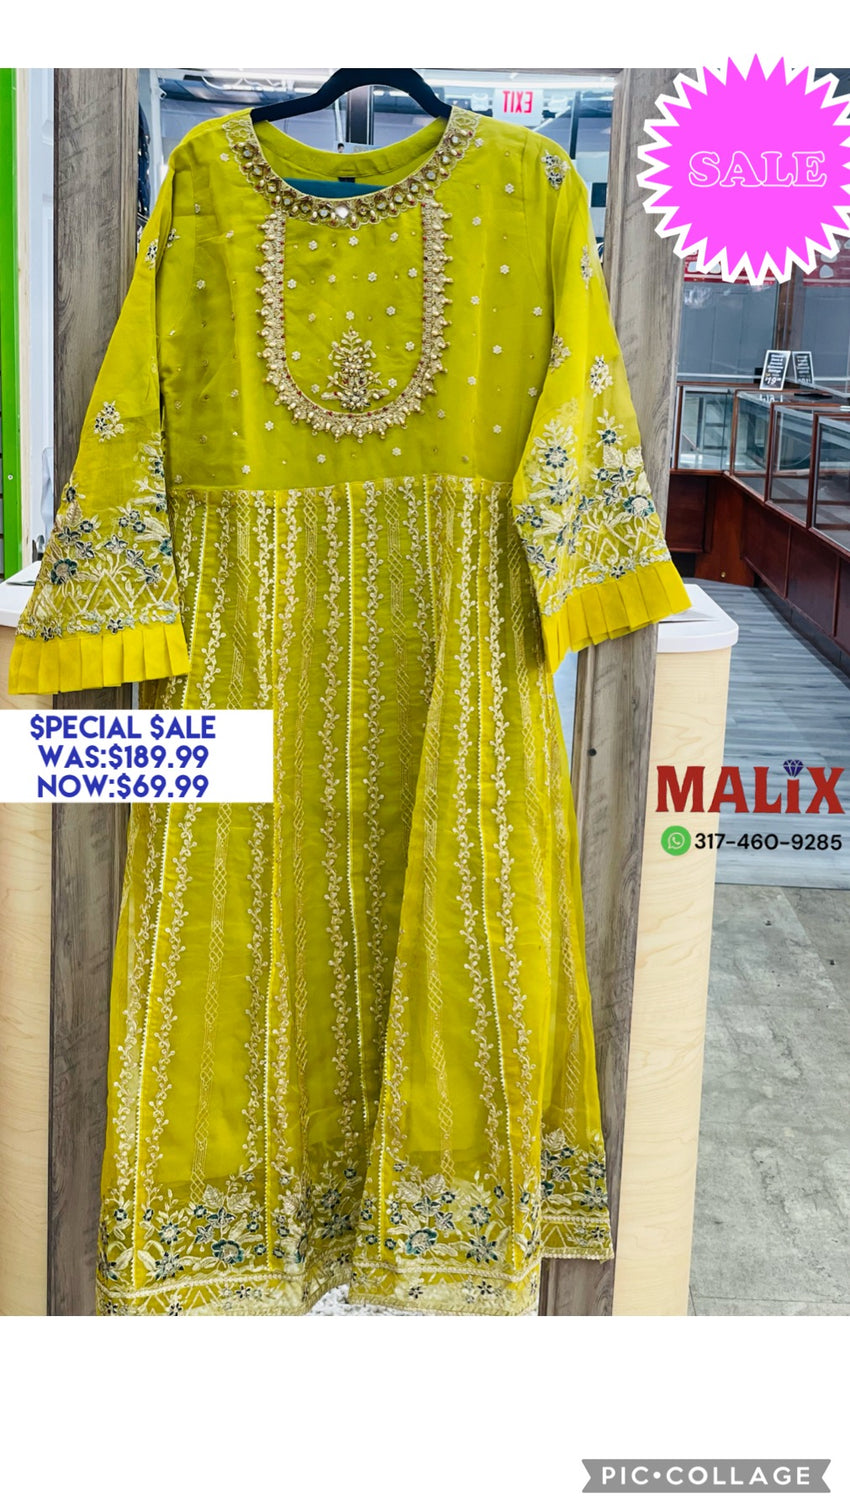 Luminous Lemon Yellow Anarkali Gown with Heavy Beaded Neck, Gold Threaded Design, Duppata, and Matching Bottom Pants